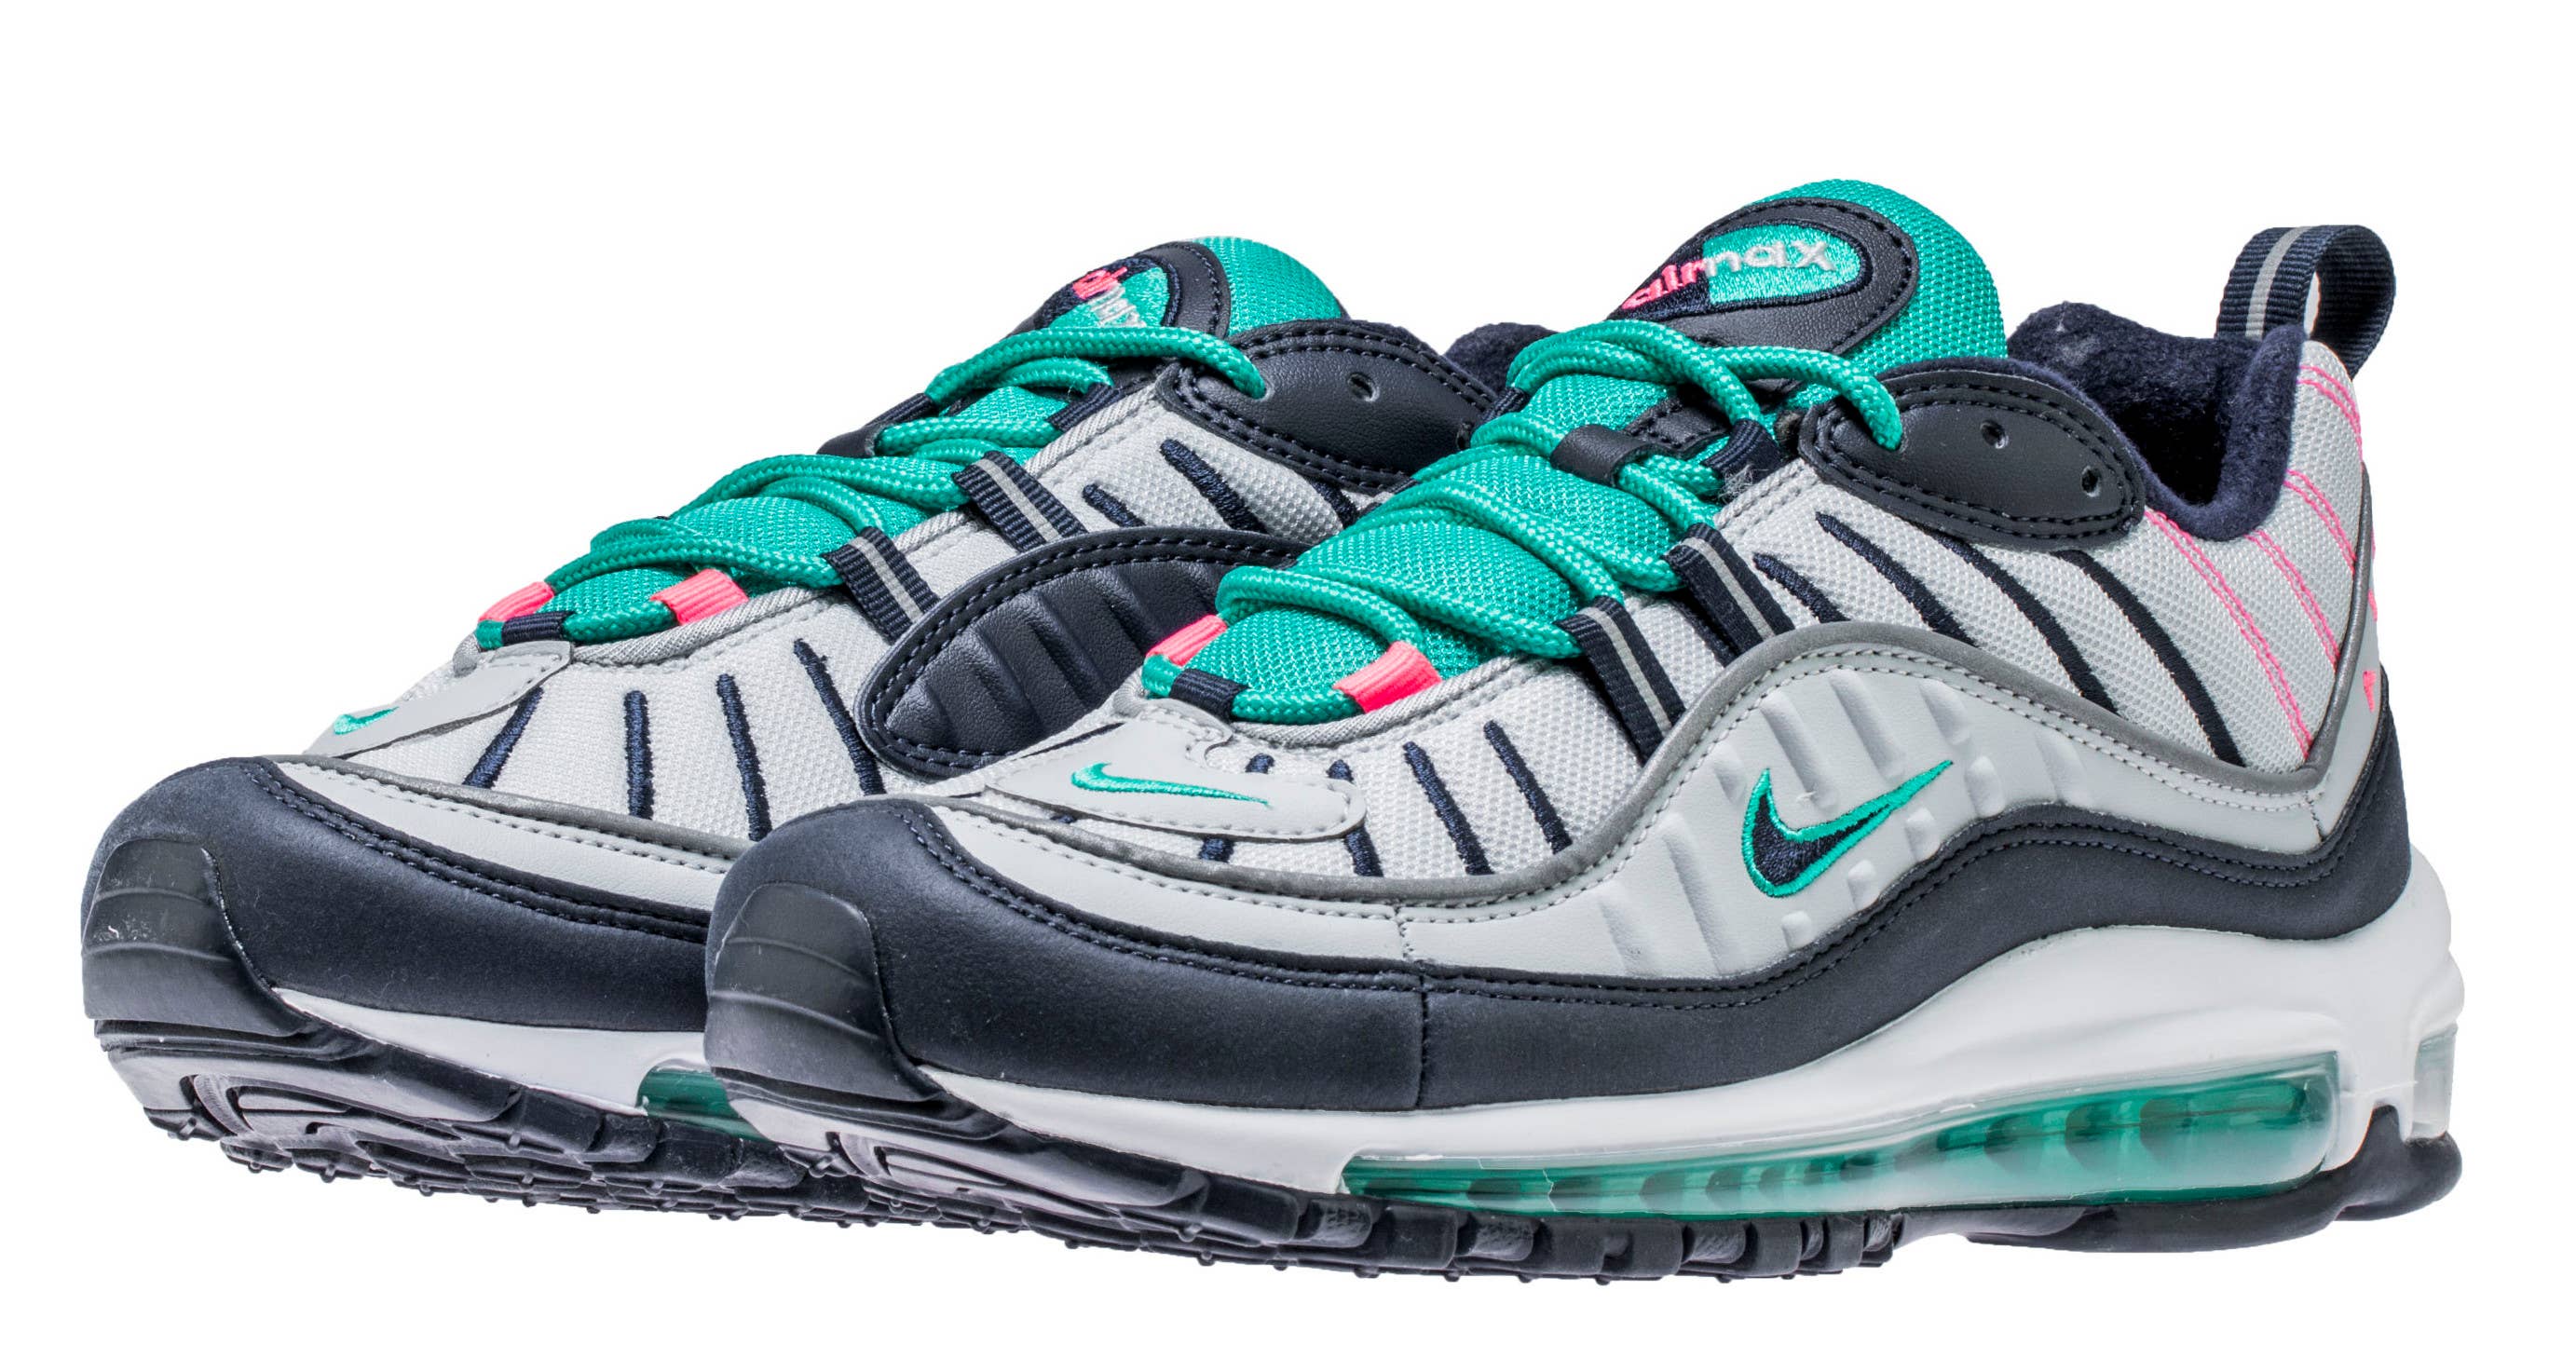 Nike Air Max 98 'Pure Platinum/Obsidian/Kinetic Green' 640744 005 (Front Pair)